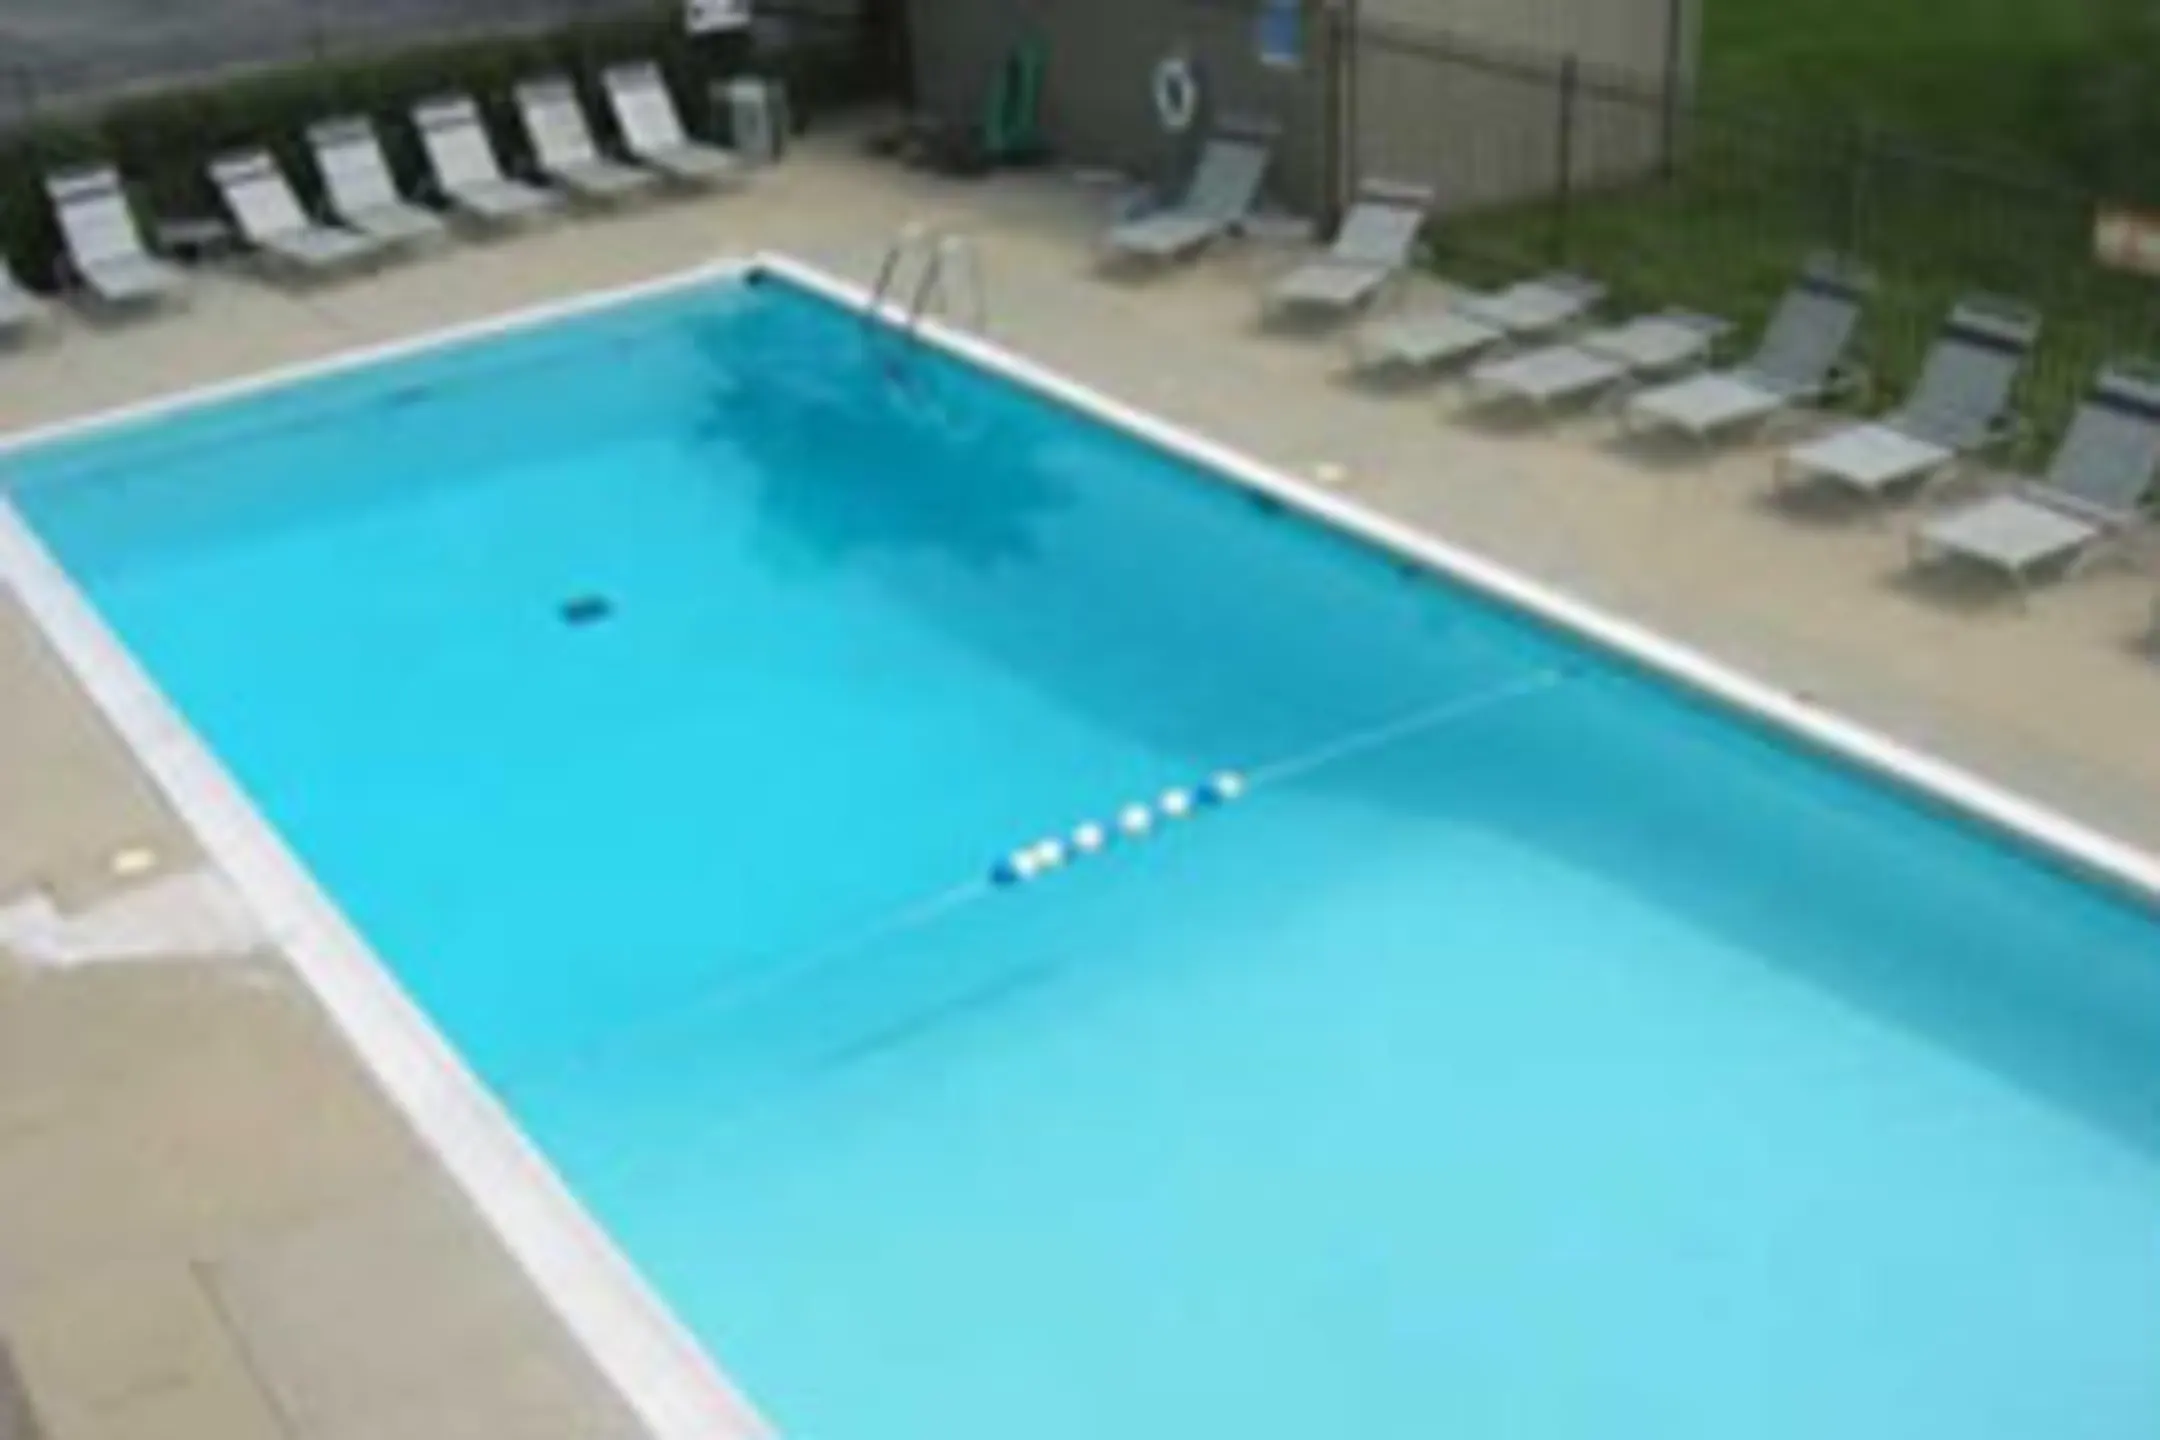 Pool - Landmark Apartments & Townhomes - Indianapolis, IN